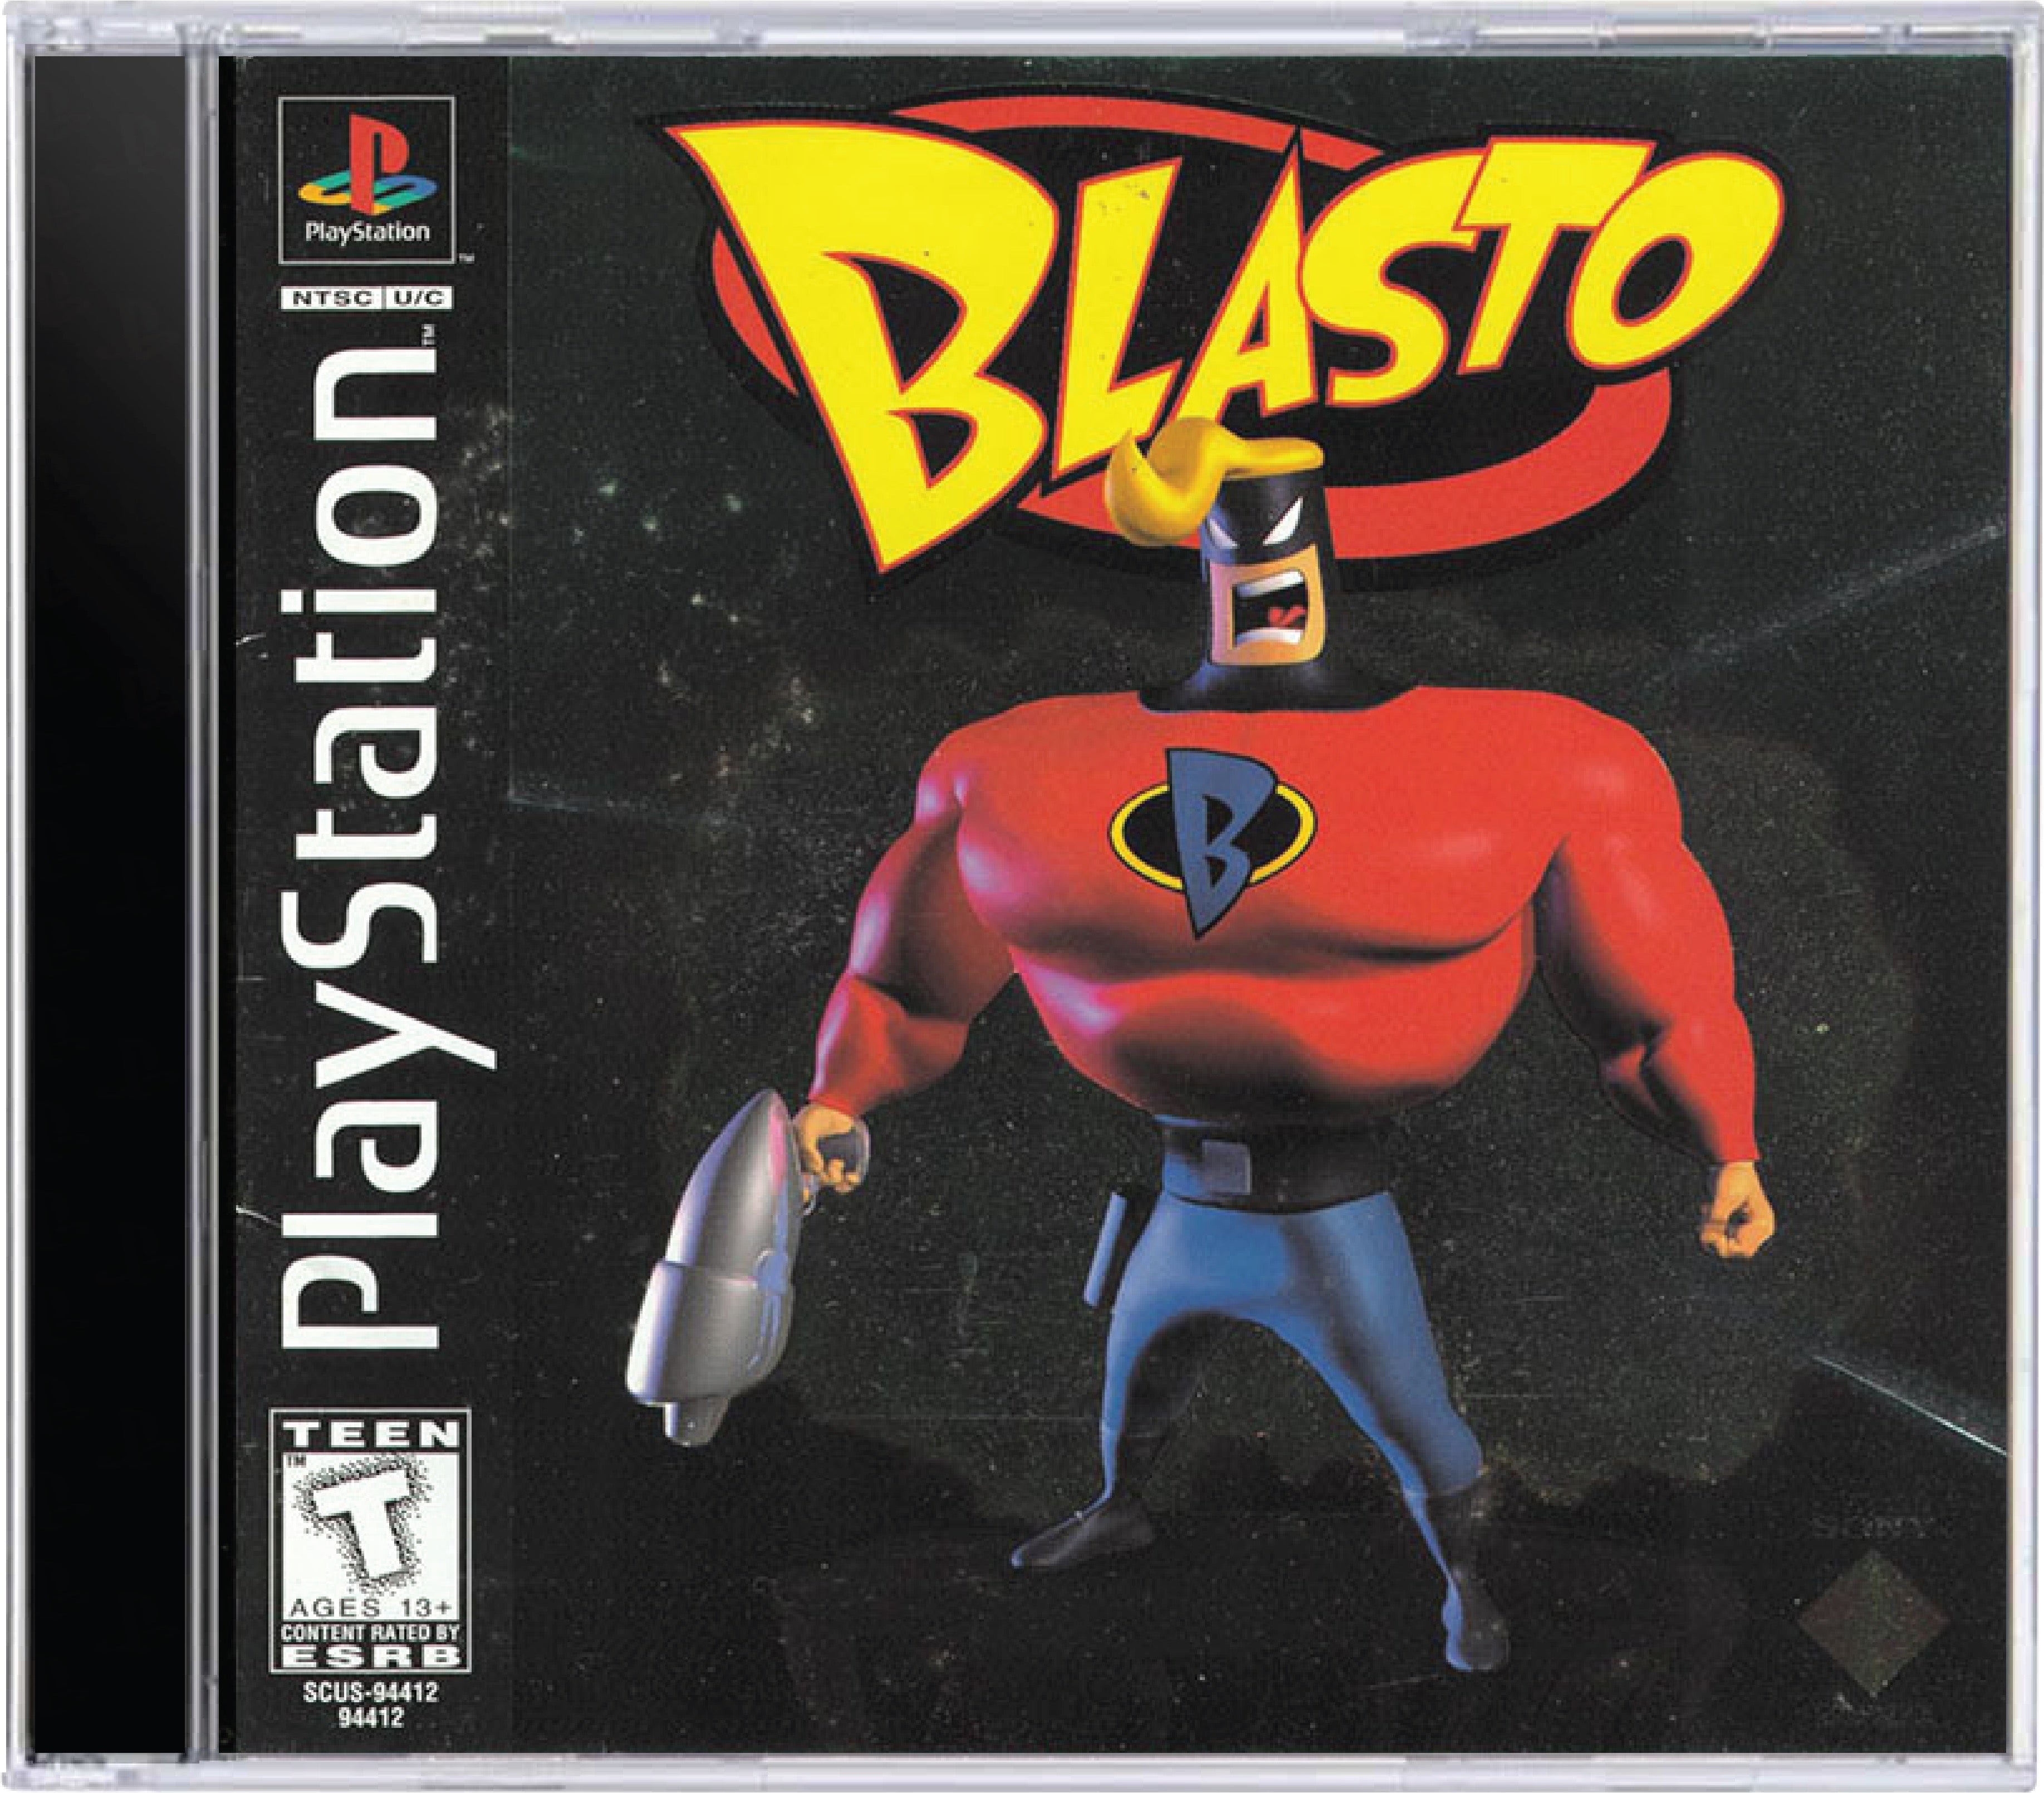 Blasto Cover Art and Product Photo